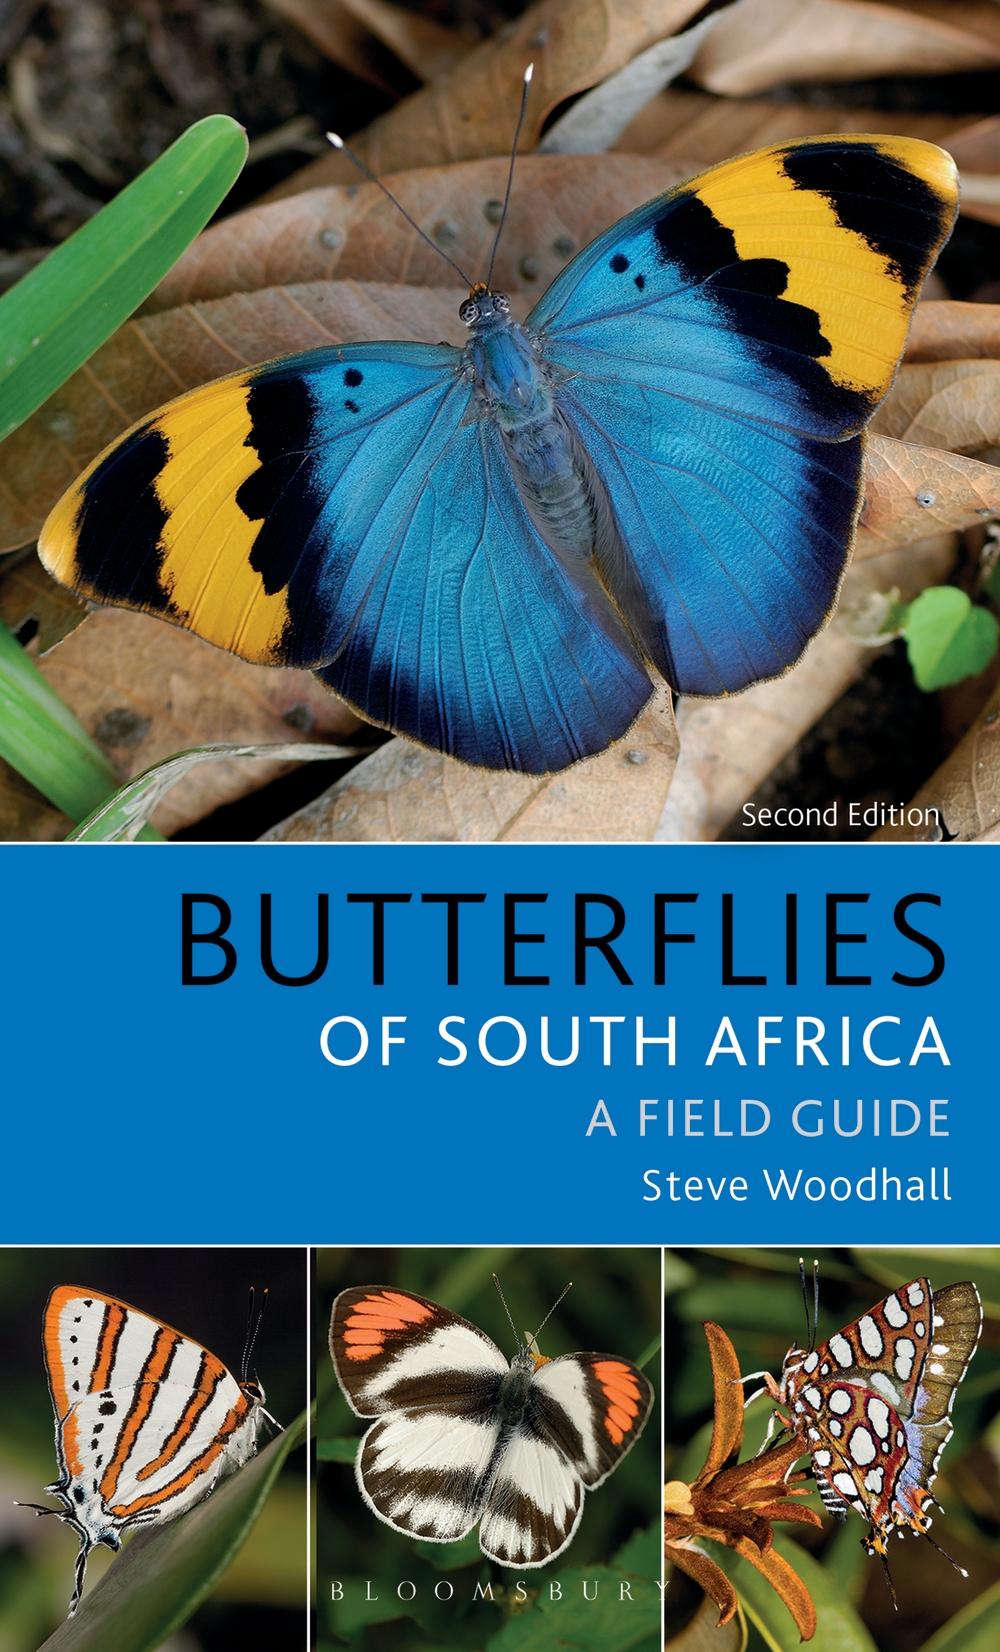 Field Guide to Butterflies of South Africa - Steve Woodhall